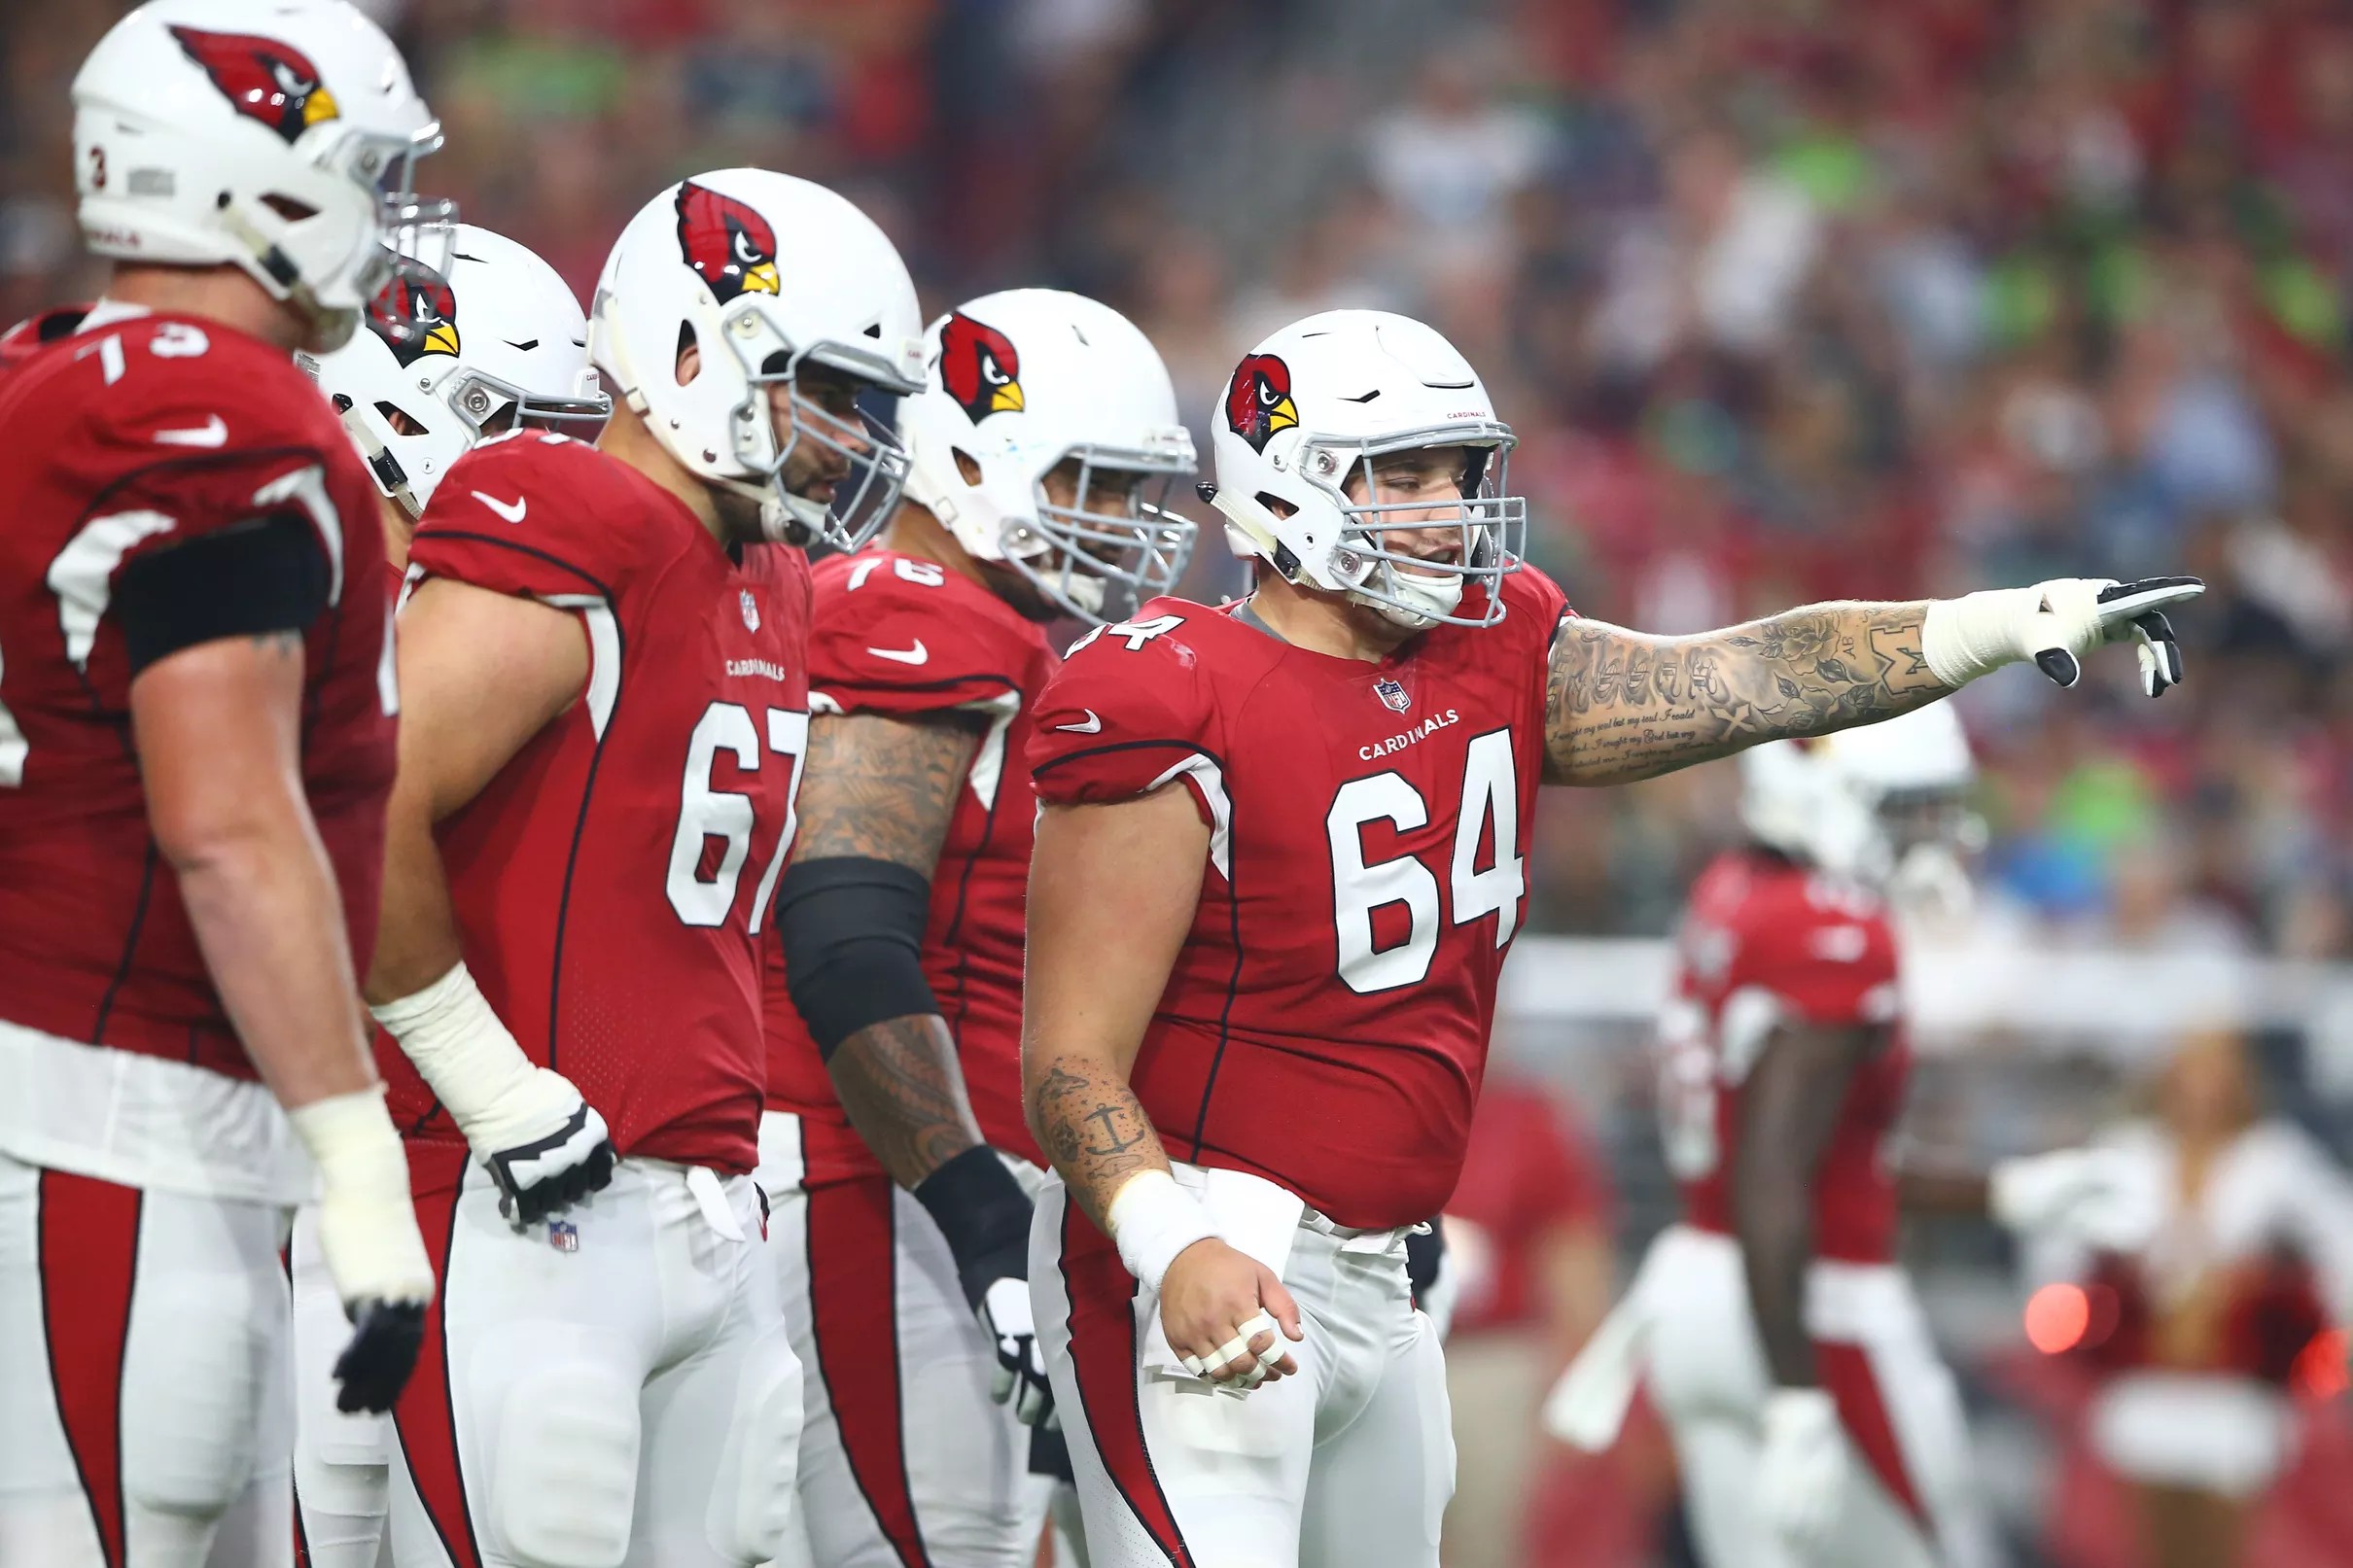 Taking a look at the Arizona Cardinals offensive line